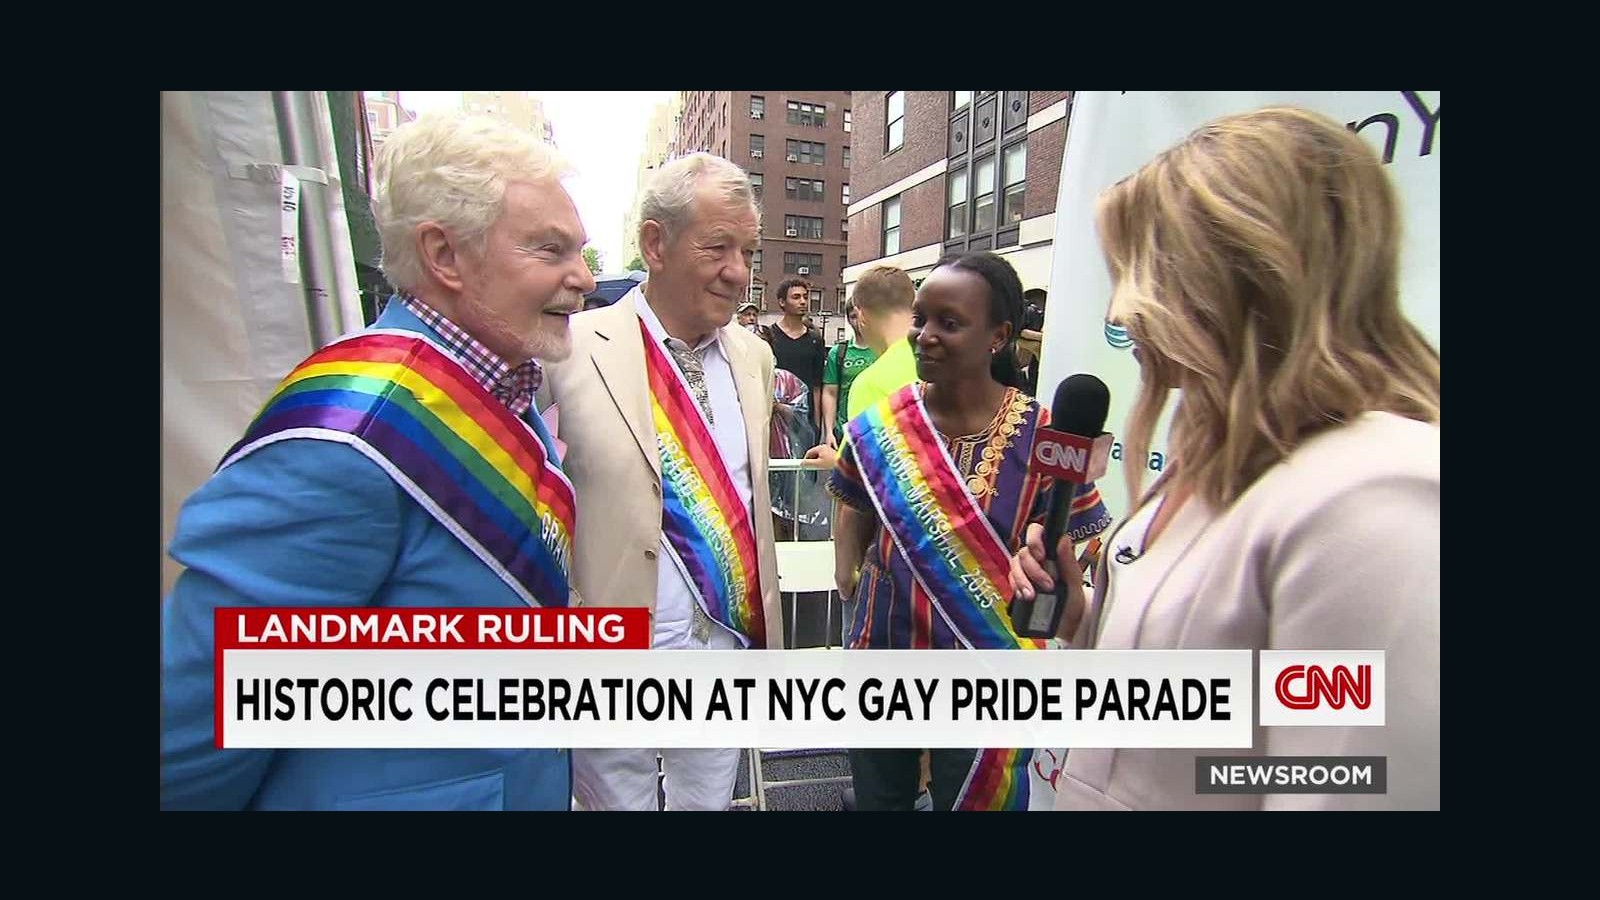 the first gay pride parade was inpired by